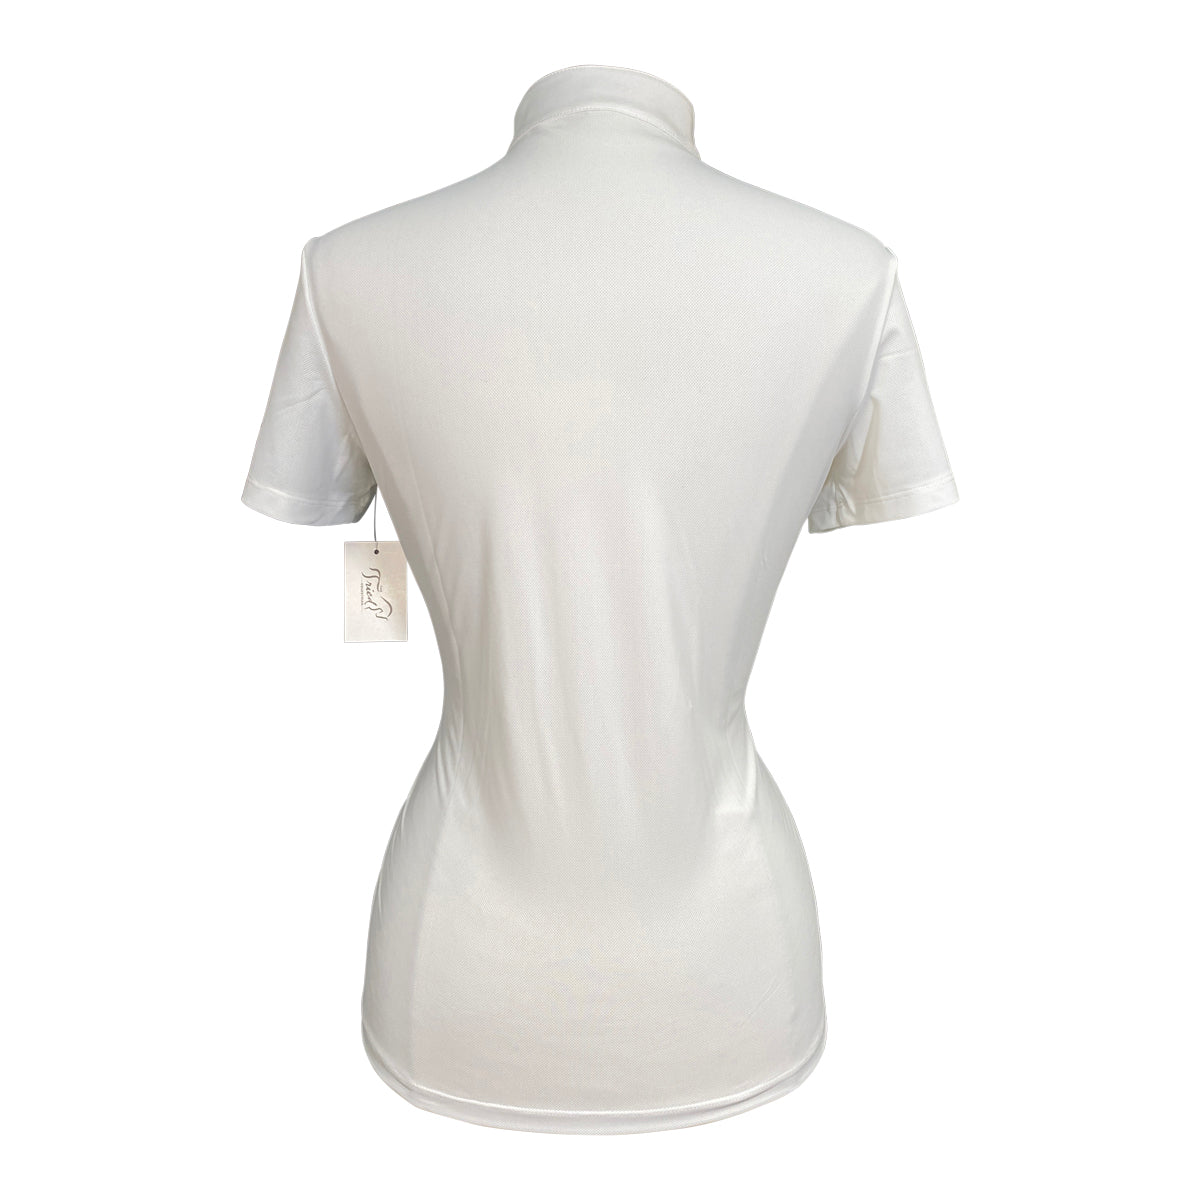 Rider's Gene Jersey & Mesh Short Sleeve Competition Polo in White